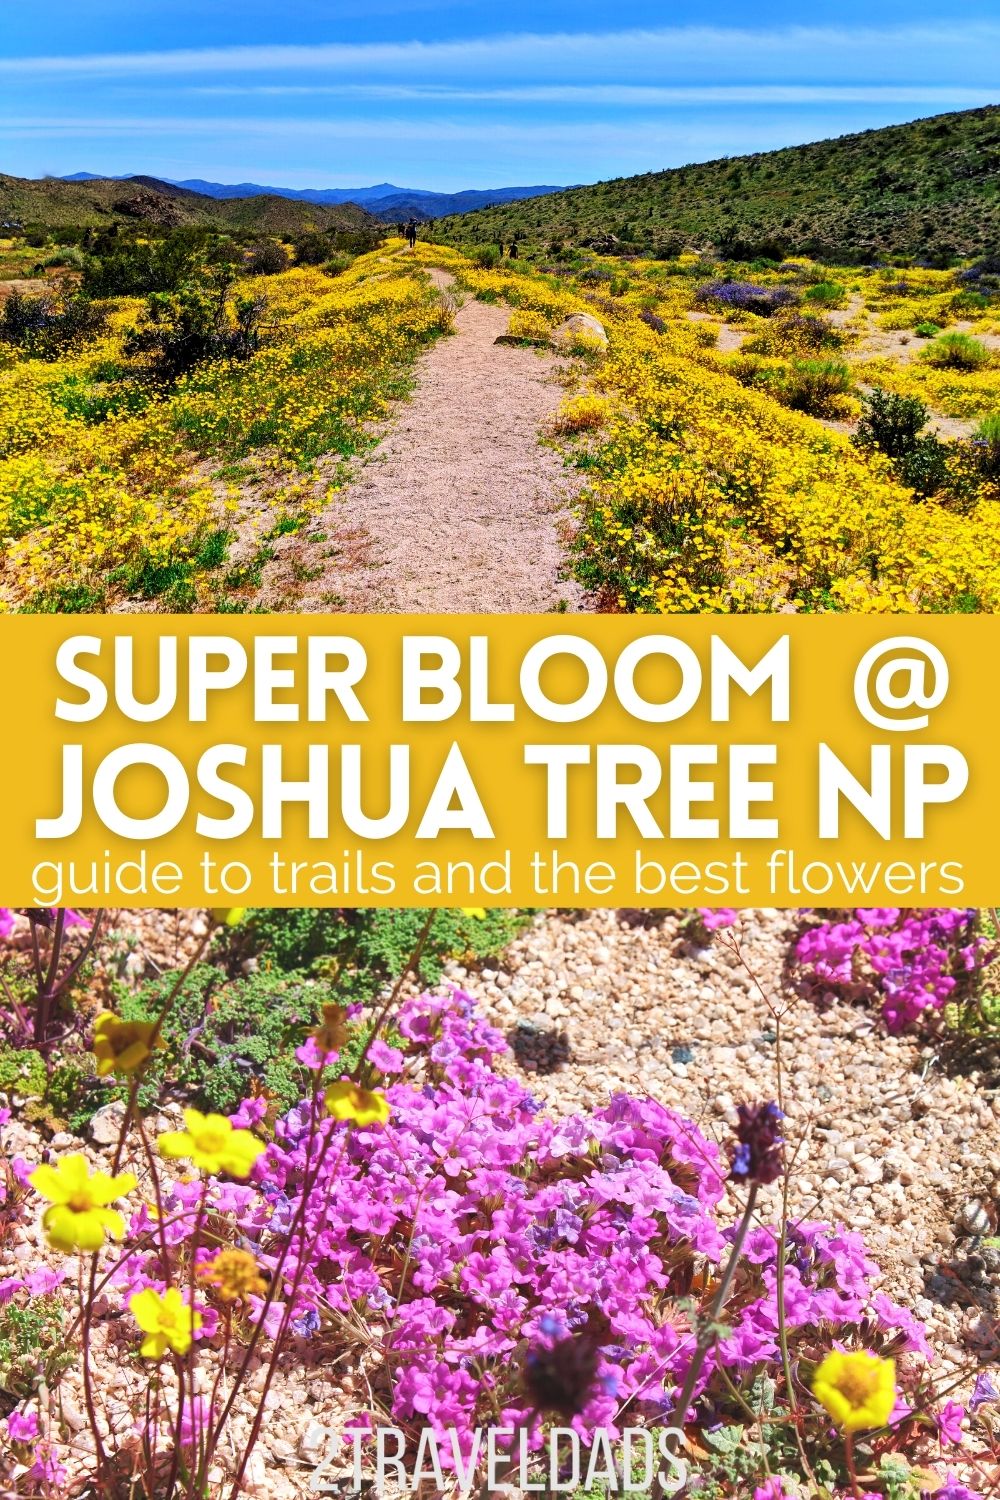 Joshua Tree National Park is so unique, and hiking during the super bloom is one of the best things to do near Palm Springs. Guide to trails and the best time to visit Joshua Tree NP.